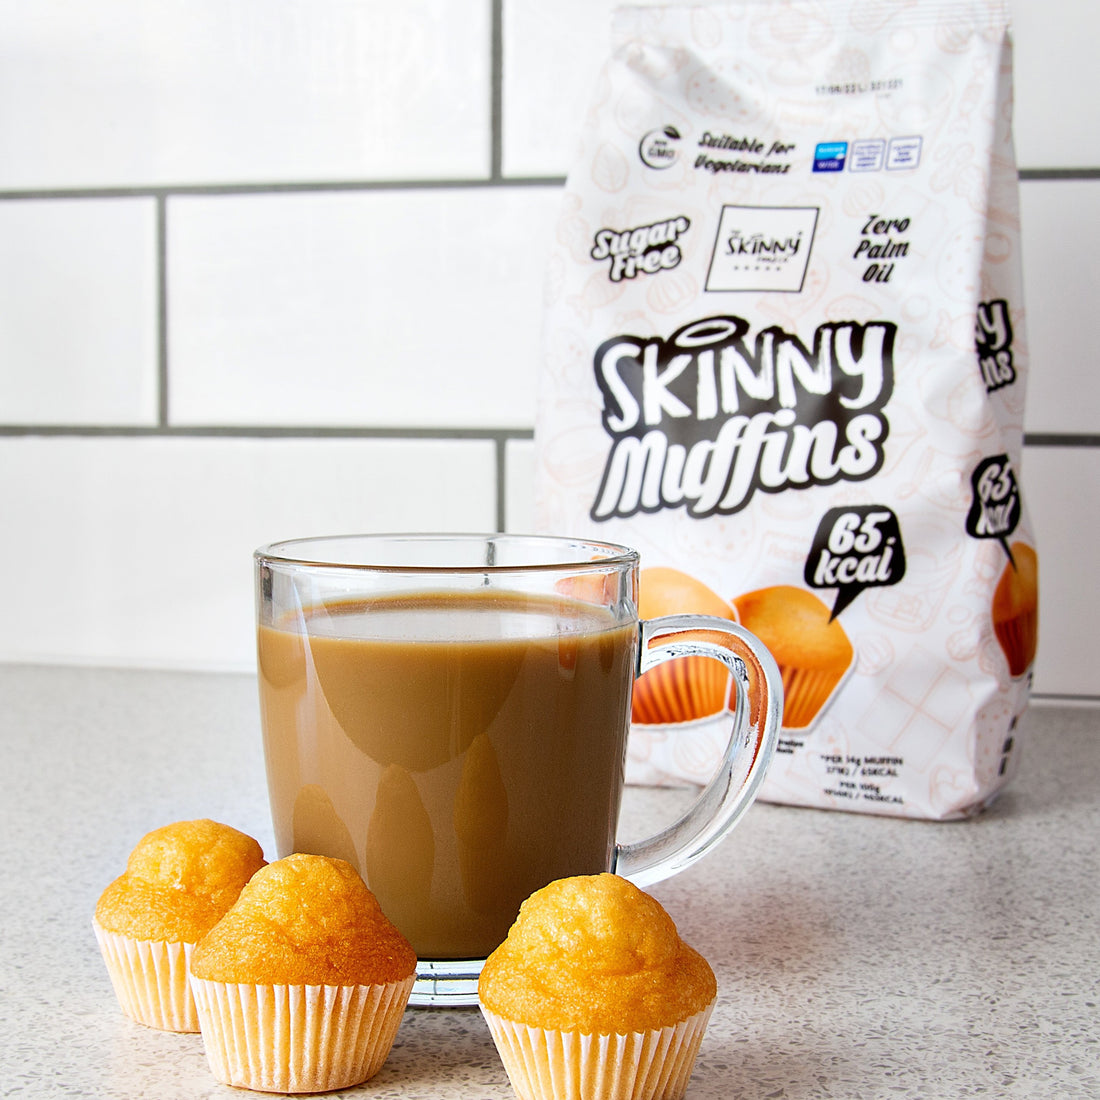 Introducing our NEW Sugar Free Skinny Muffins! - theskinnyfoodco